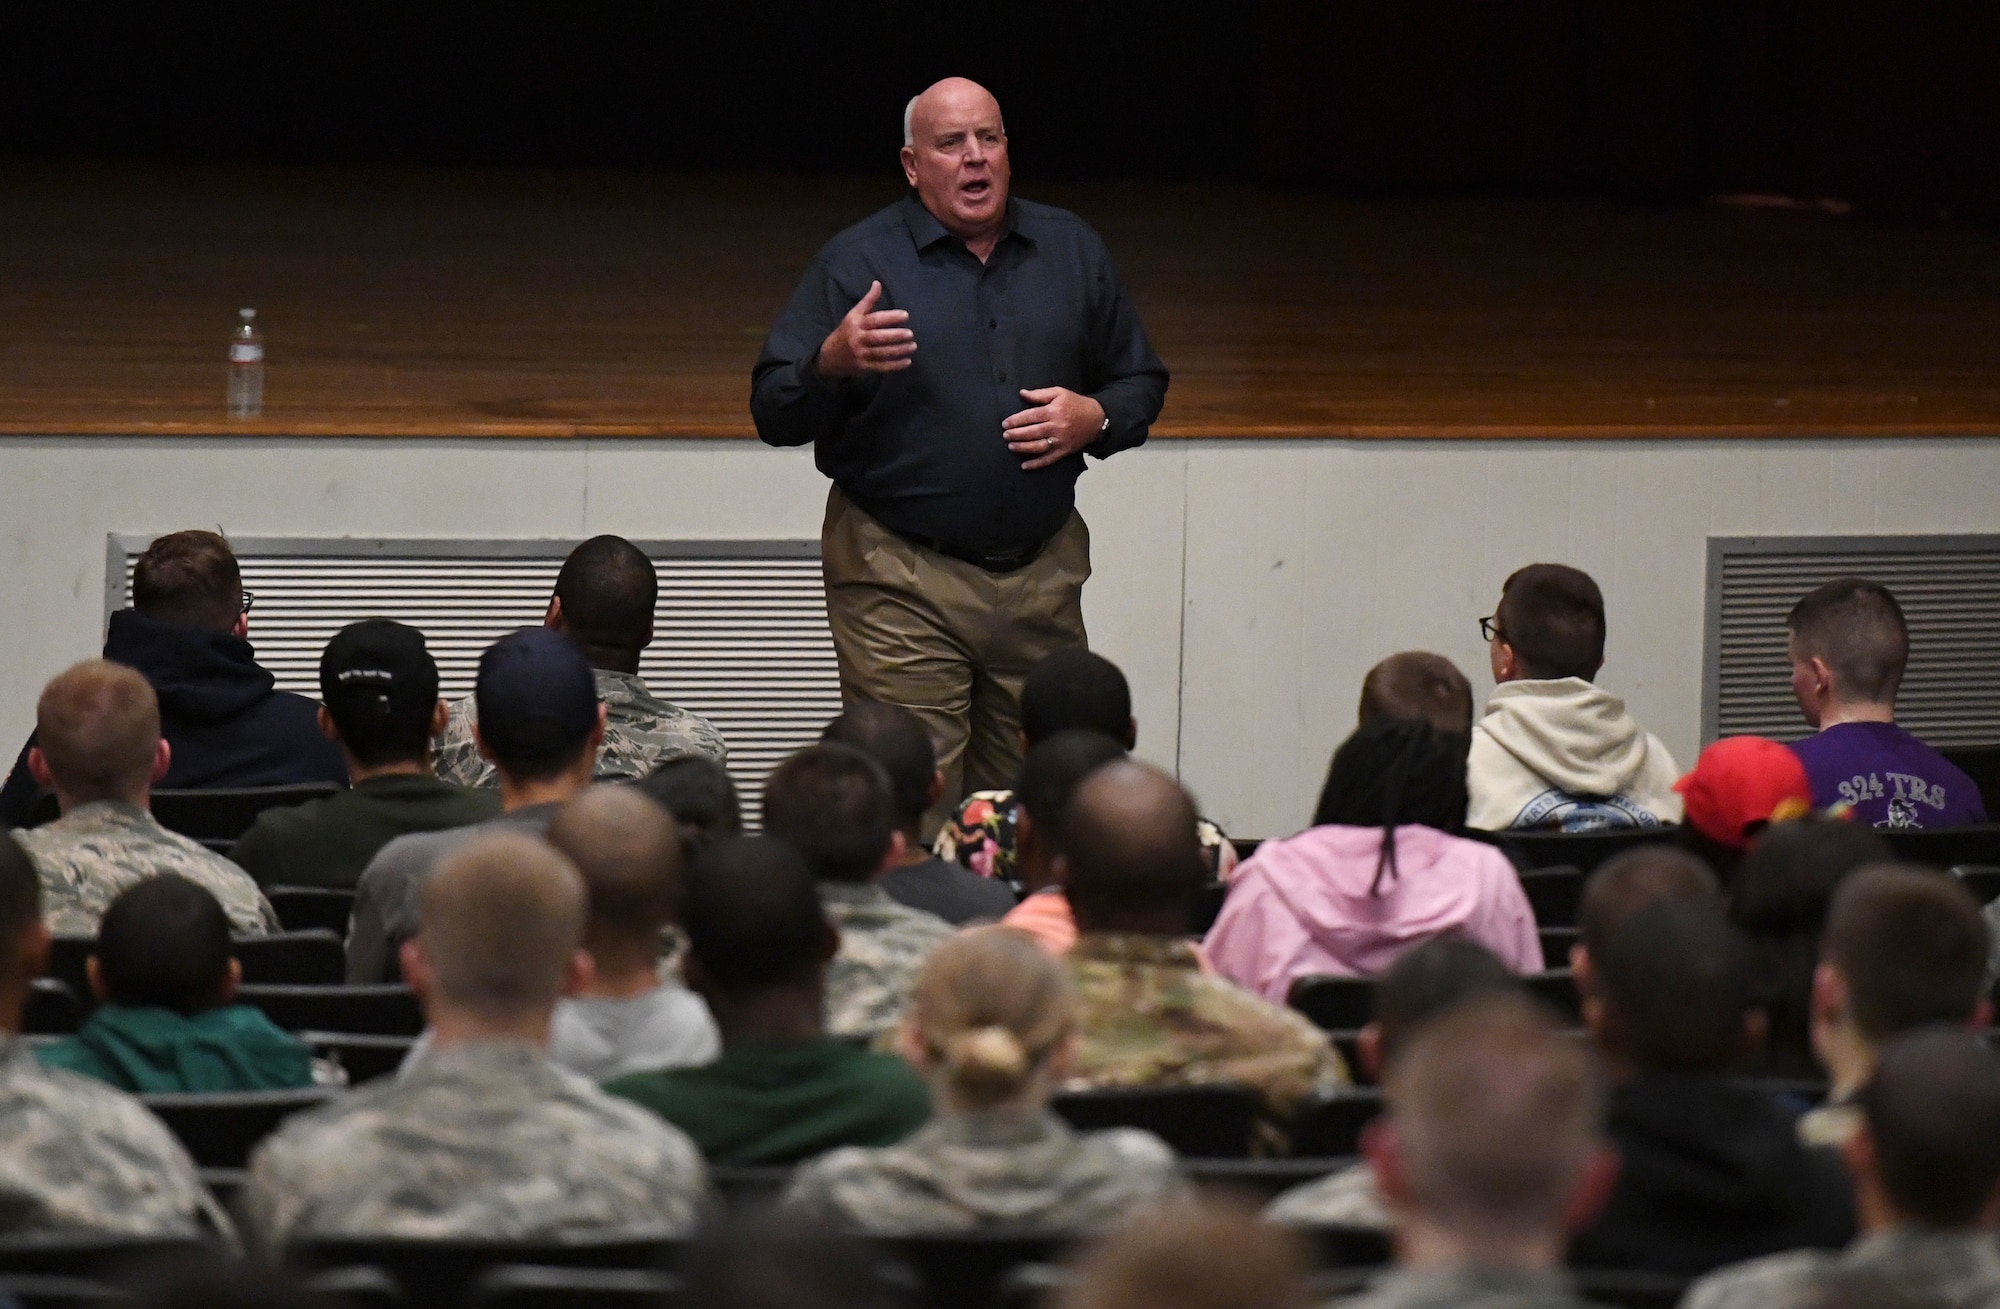 Barry Lyons, Biloxi Shuckers Minor League Baseball Team ambassador, delivers opening remarks prior to the playing the movie, 42, inside the Welch Theater at Keesler Air Force Base, Mississippi, Feb. 21, 2019. The movie, a story of Jackie Robinson's rise to fame in Major League Baseball, was shown in celebration for Black History Month. Lyons played 14 years of professional baseball to include seven years in the major leagues. Keesler hosted several events throughout the month to include a 5K run, luncheon, movies and will conclude with a close-out celebration Feb. 28. The events are meant to help Keesler personnel to remember, educate and celebrate black history. (U.S. Air Force photo by Kemberly Groue)